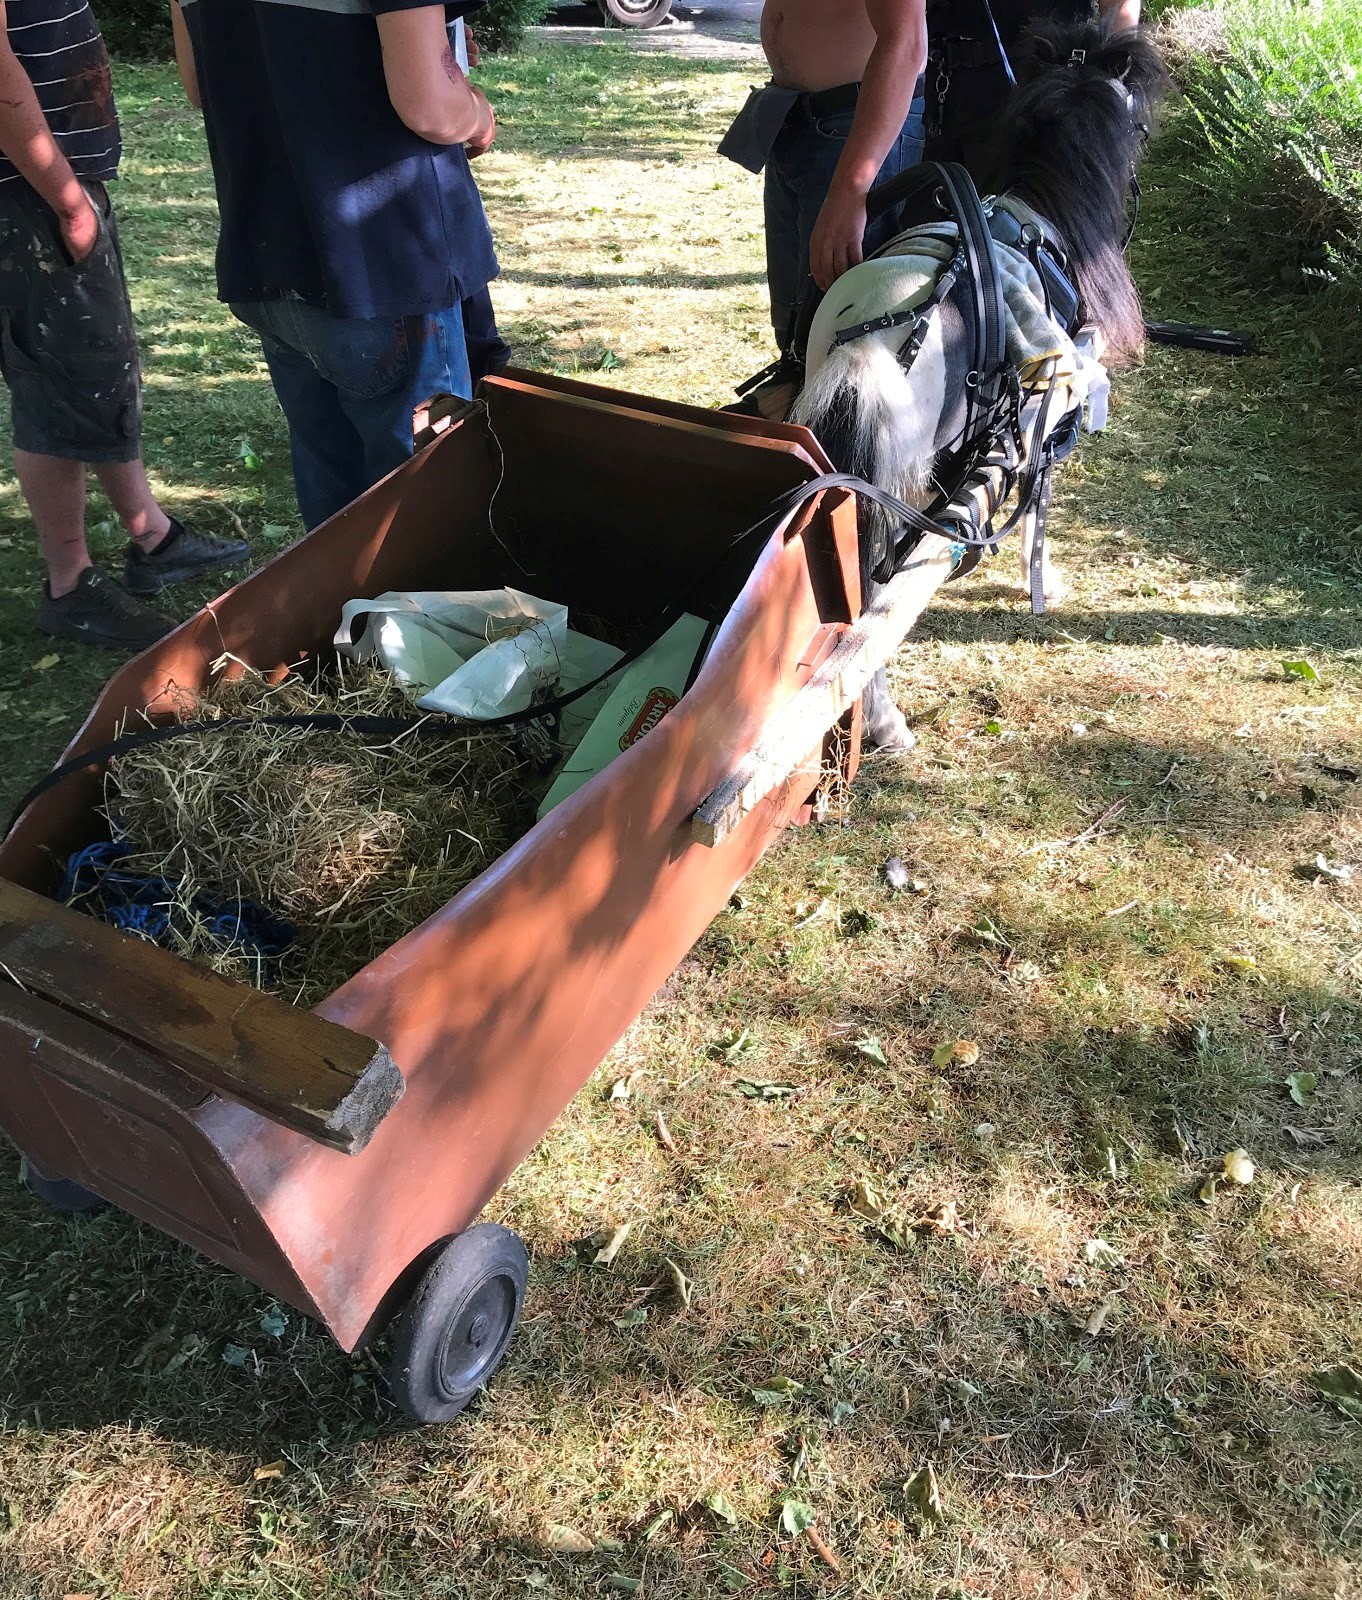 The carriage pulled by the pony was made of a wheelie bin with the front cut away (RSPCA/PA)